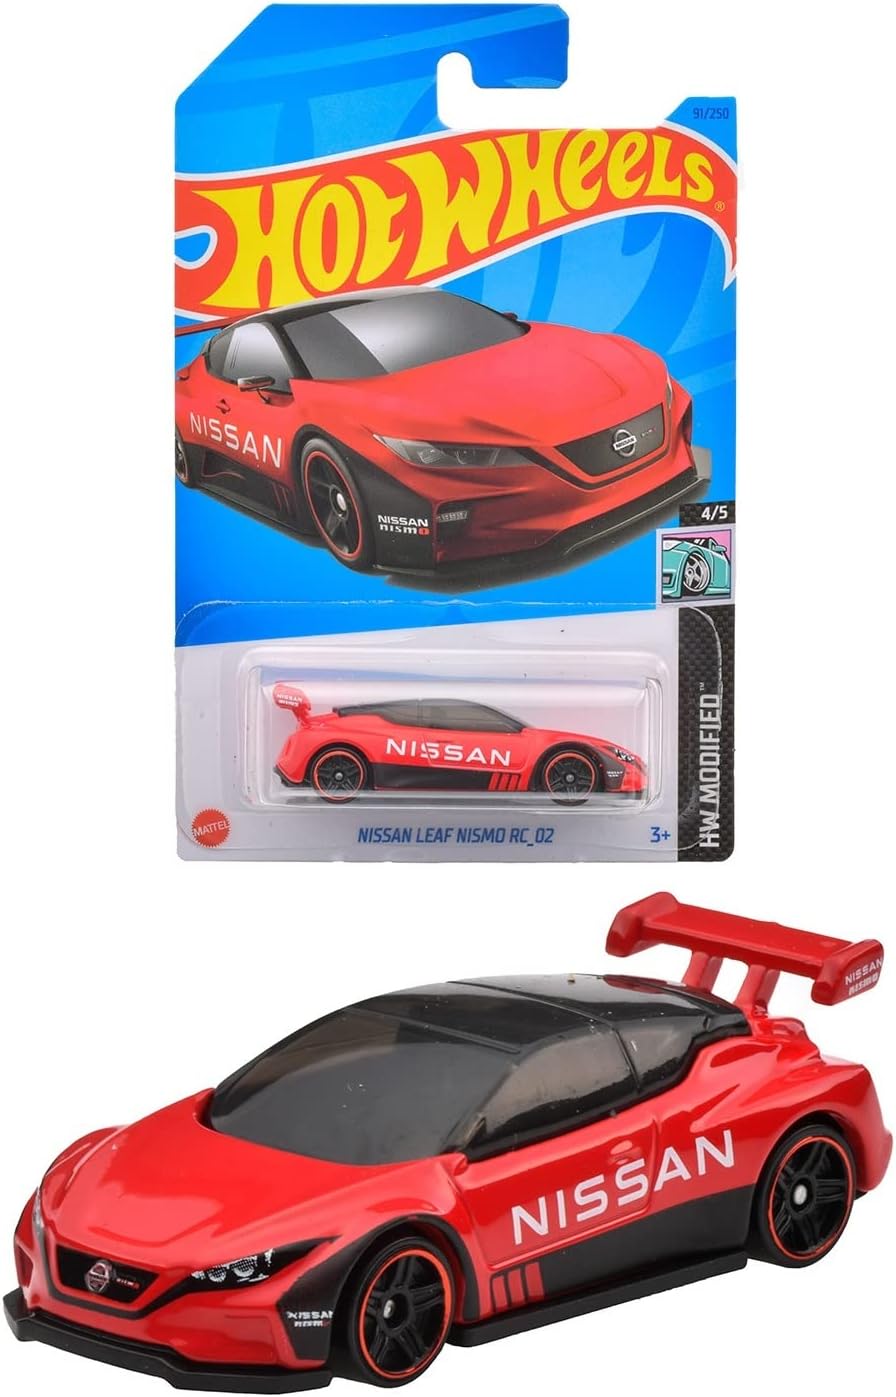 Hot Wheels HW Modified 4/5 Nissan Leaf Nismo RC_02 (Red) - Japanese Card